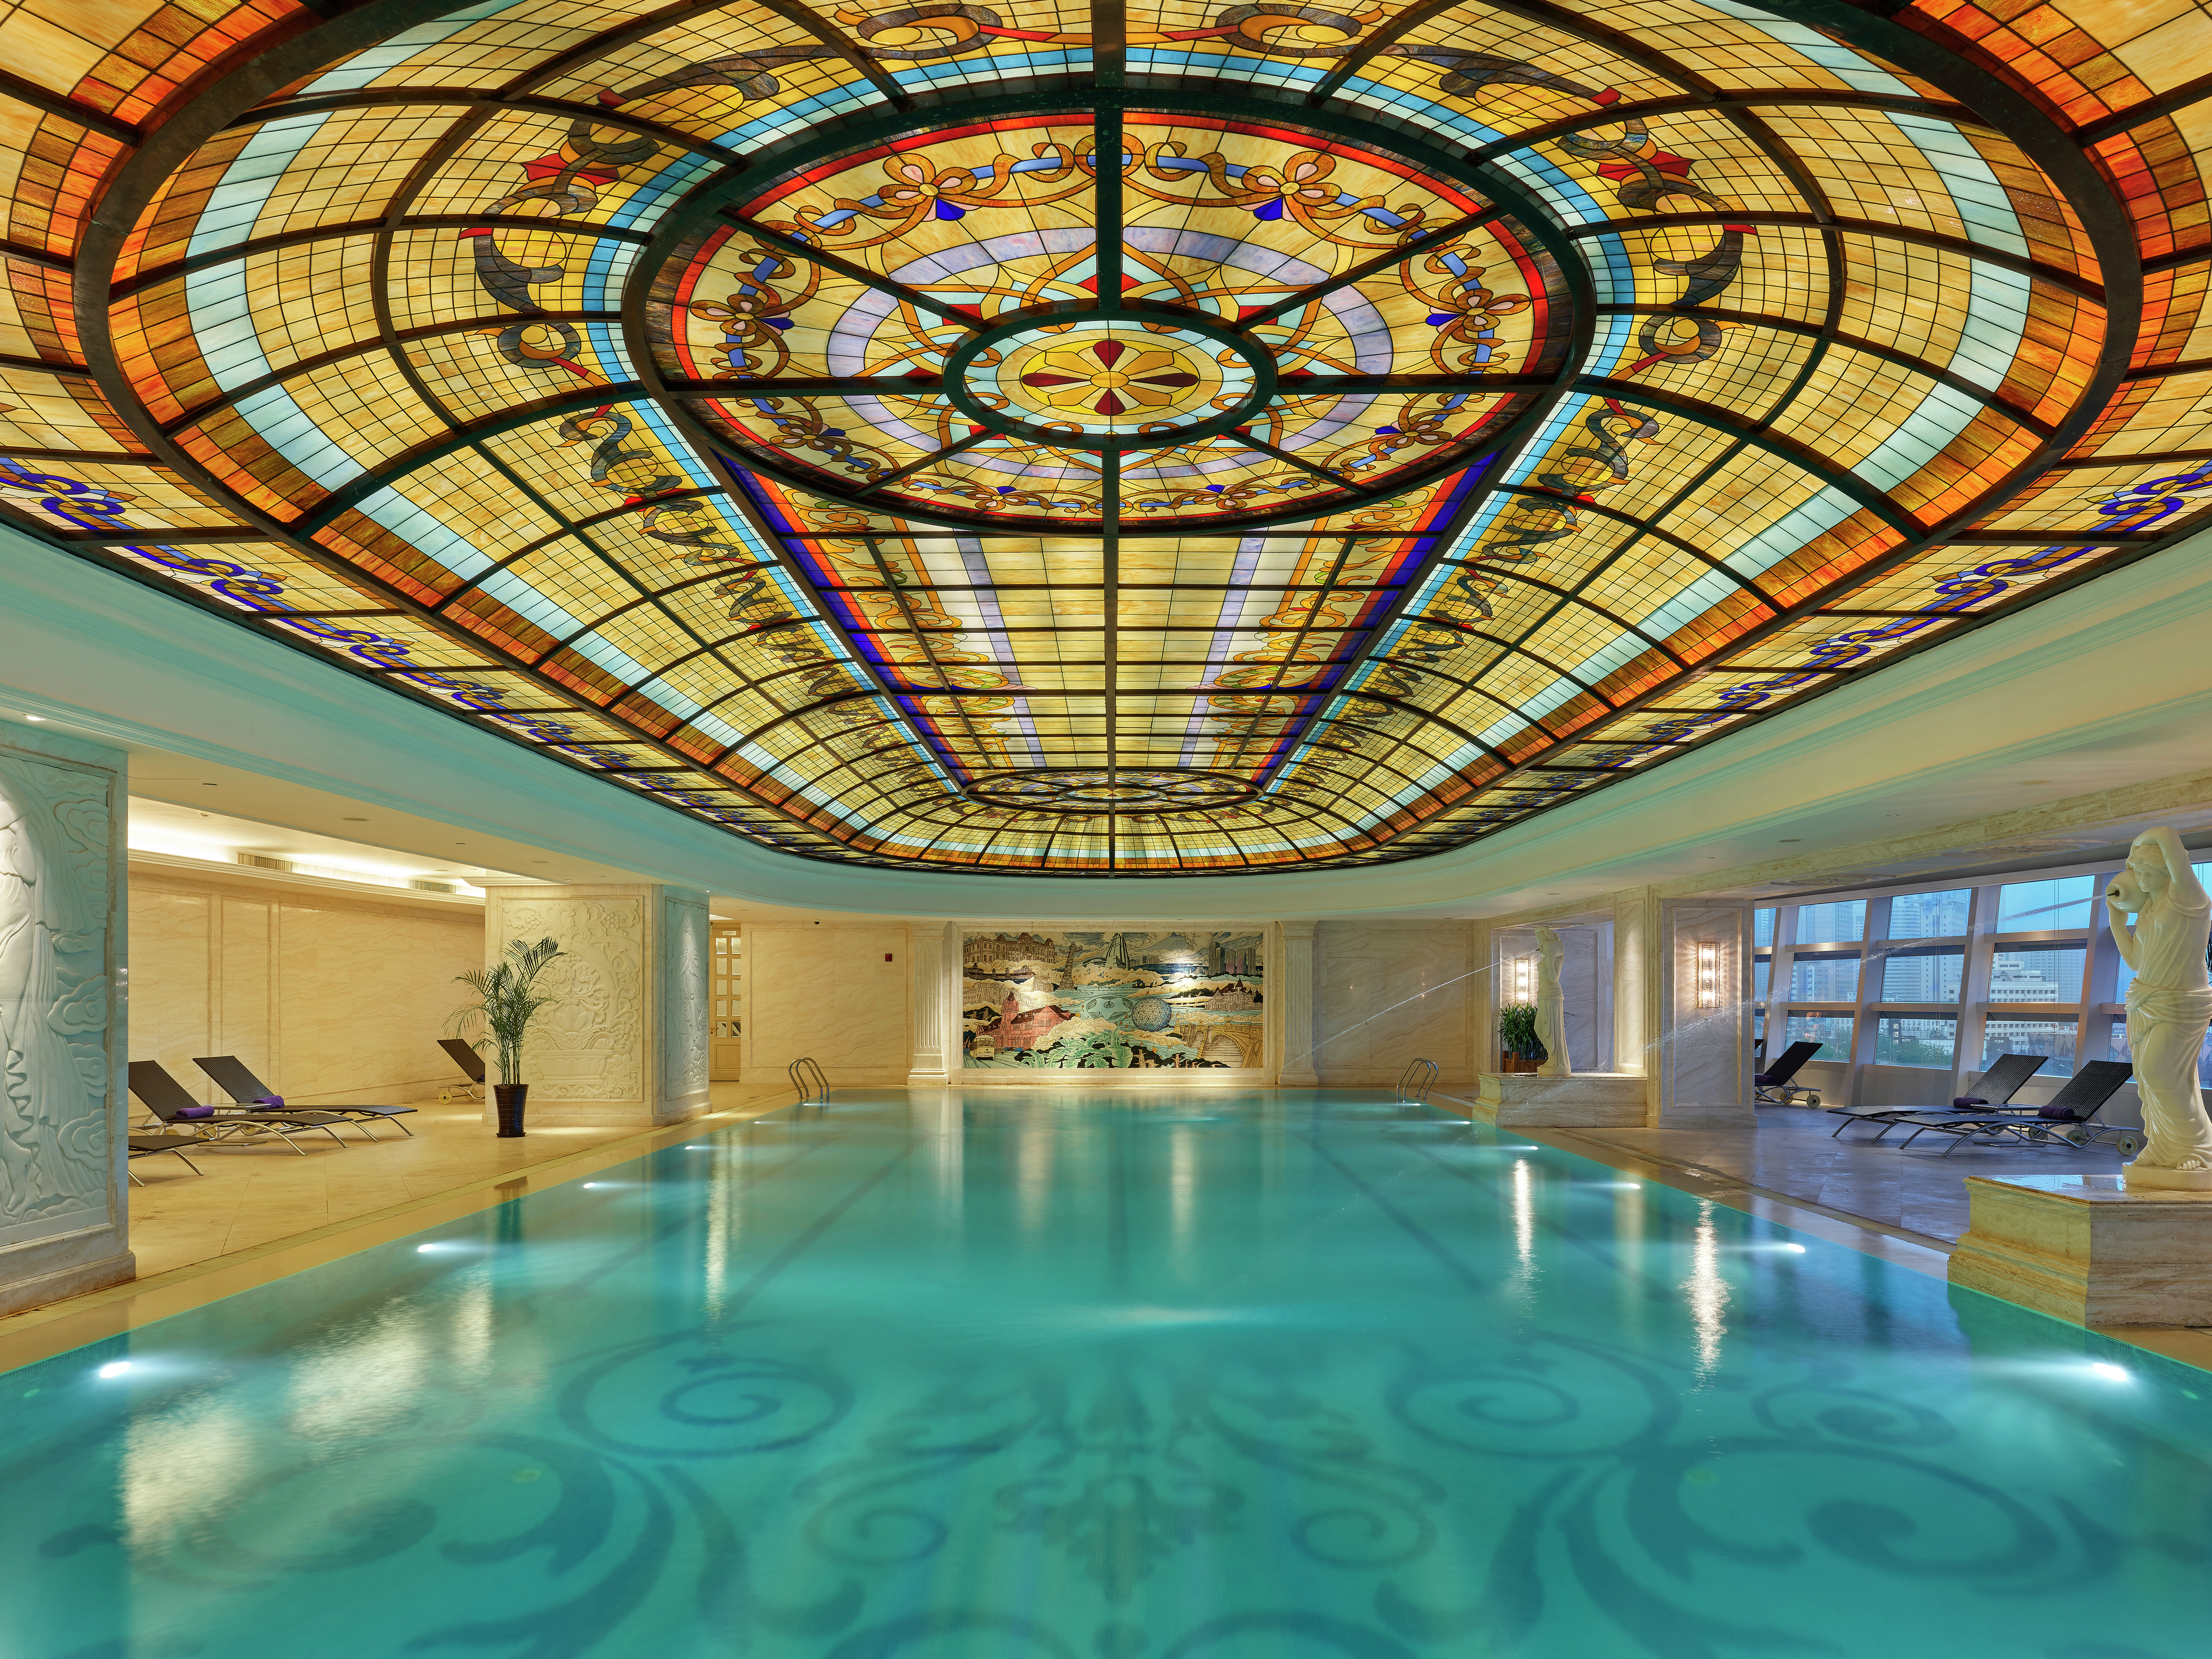 Indoor pool with ornate ceiling